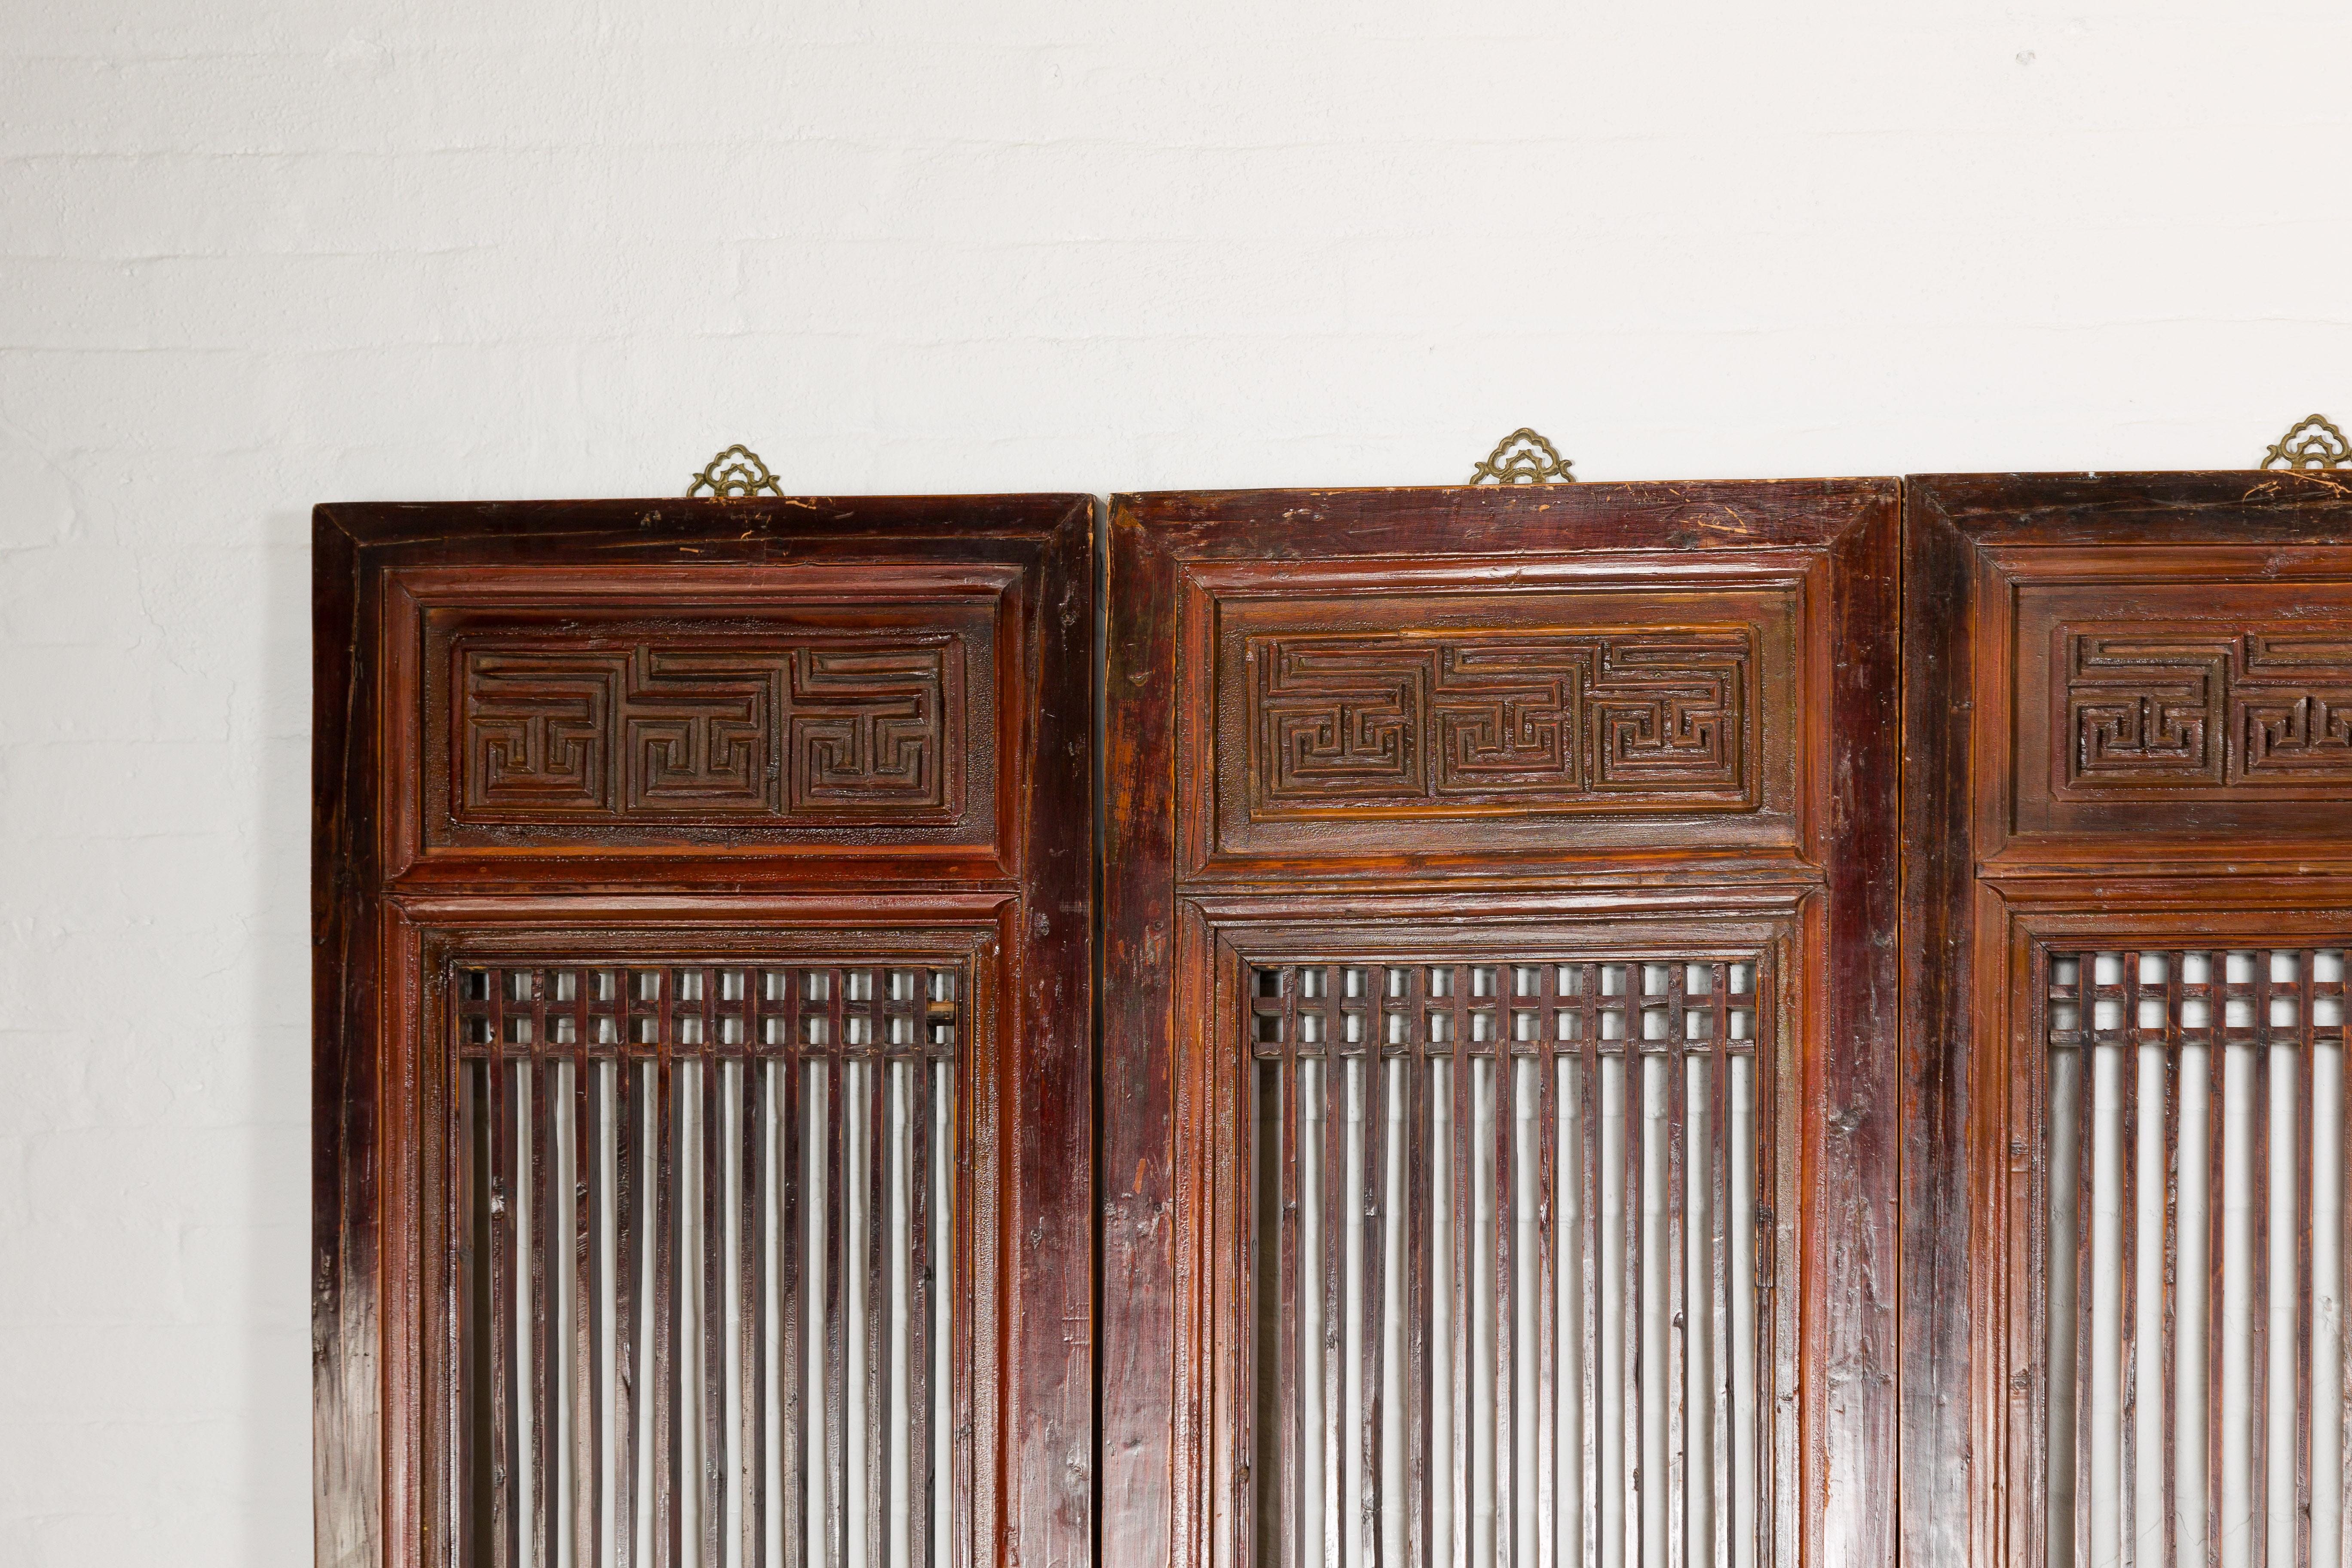 20th Century Chinese Qing Dynasty Six-Panel Lacquered Screen with Carved Meander Motifs For Sale